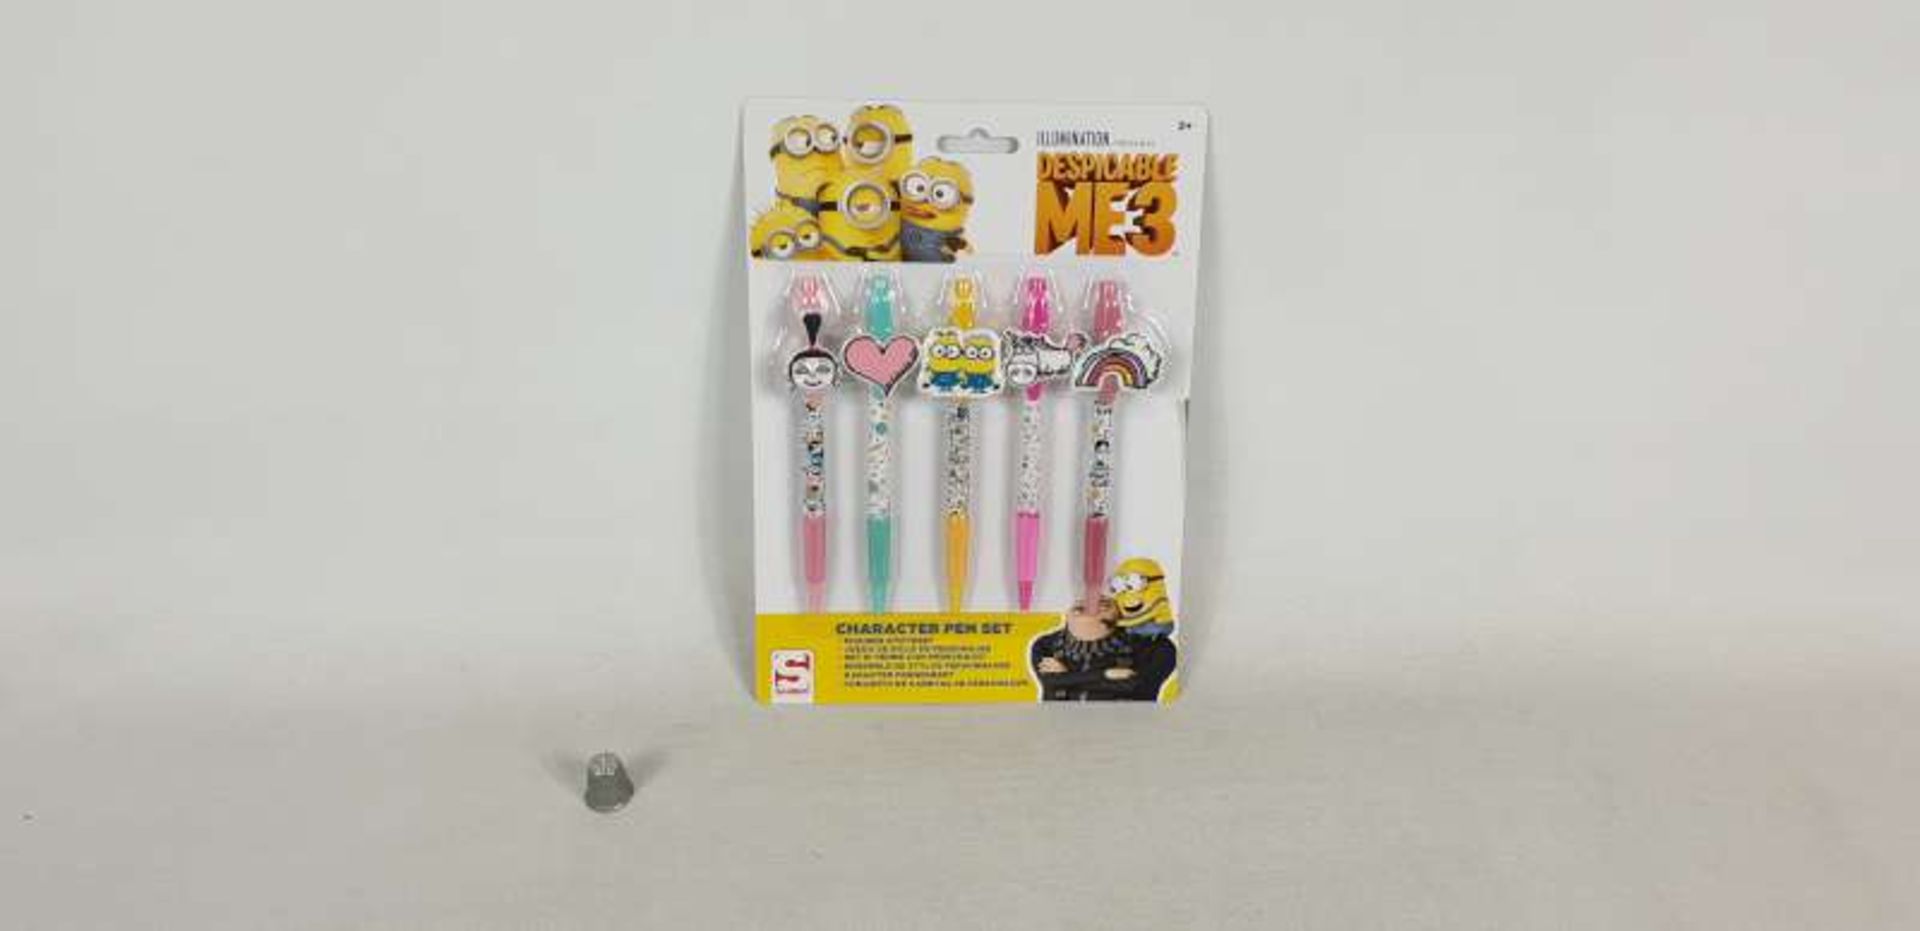 144 X SETS OF 5 DESPICABLE ME CHARACTER PEN SETS IN 3 BOXES